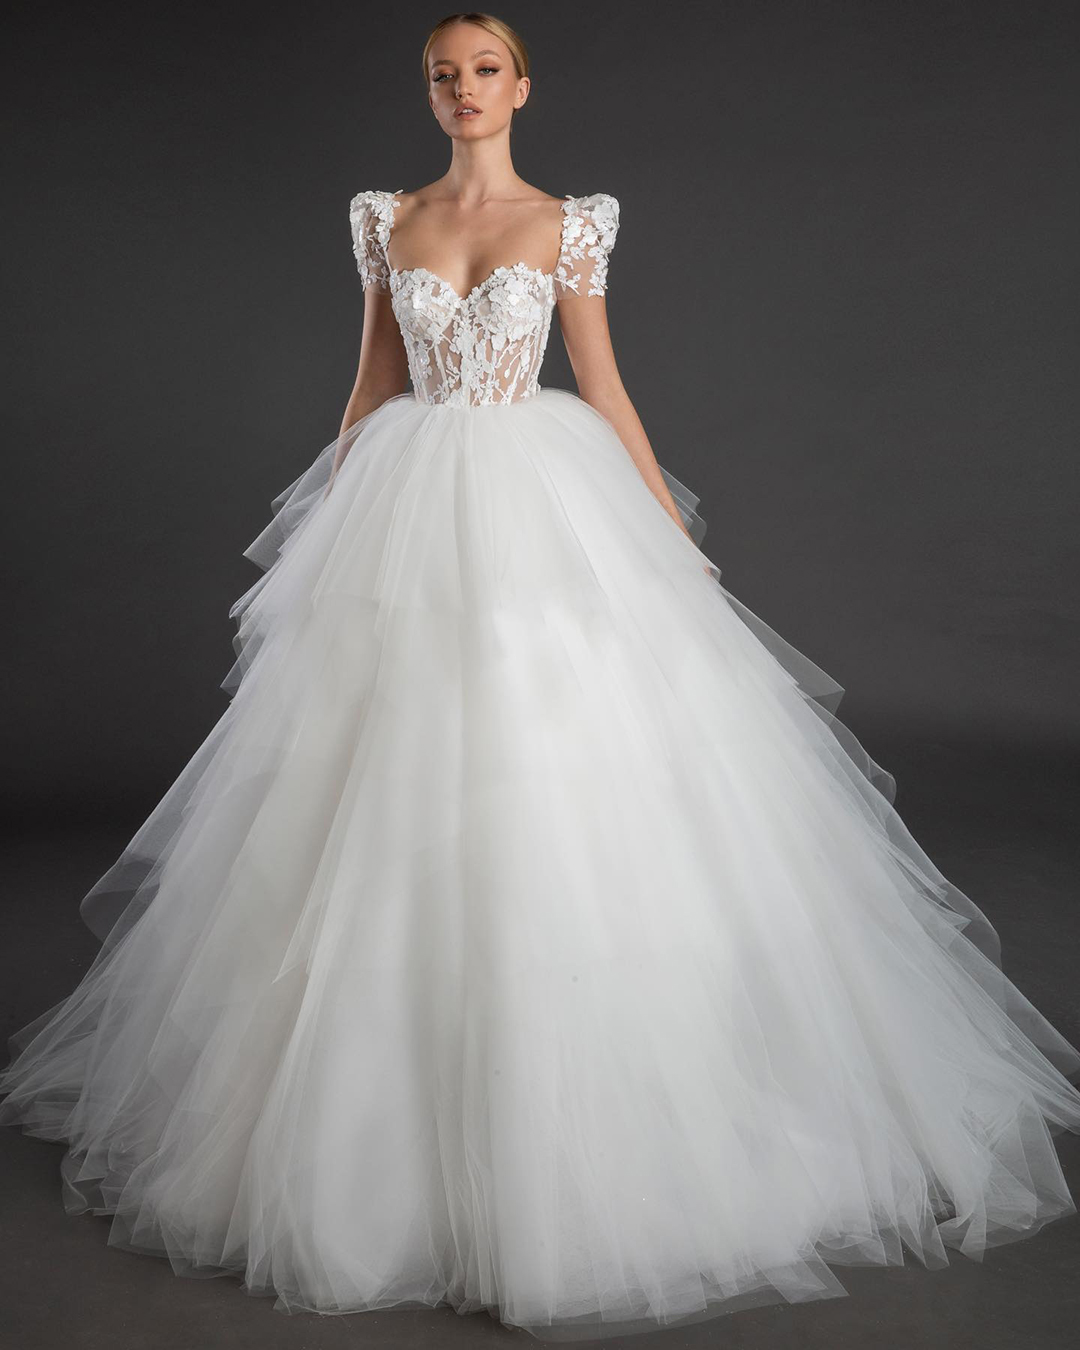 ball gown wedding dresses sweetheart neckline with cap sleeves floral appliques pnina tornai